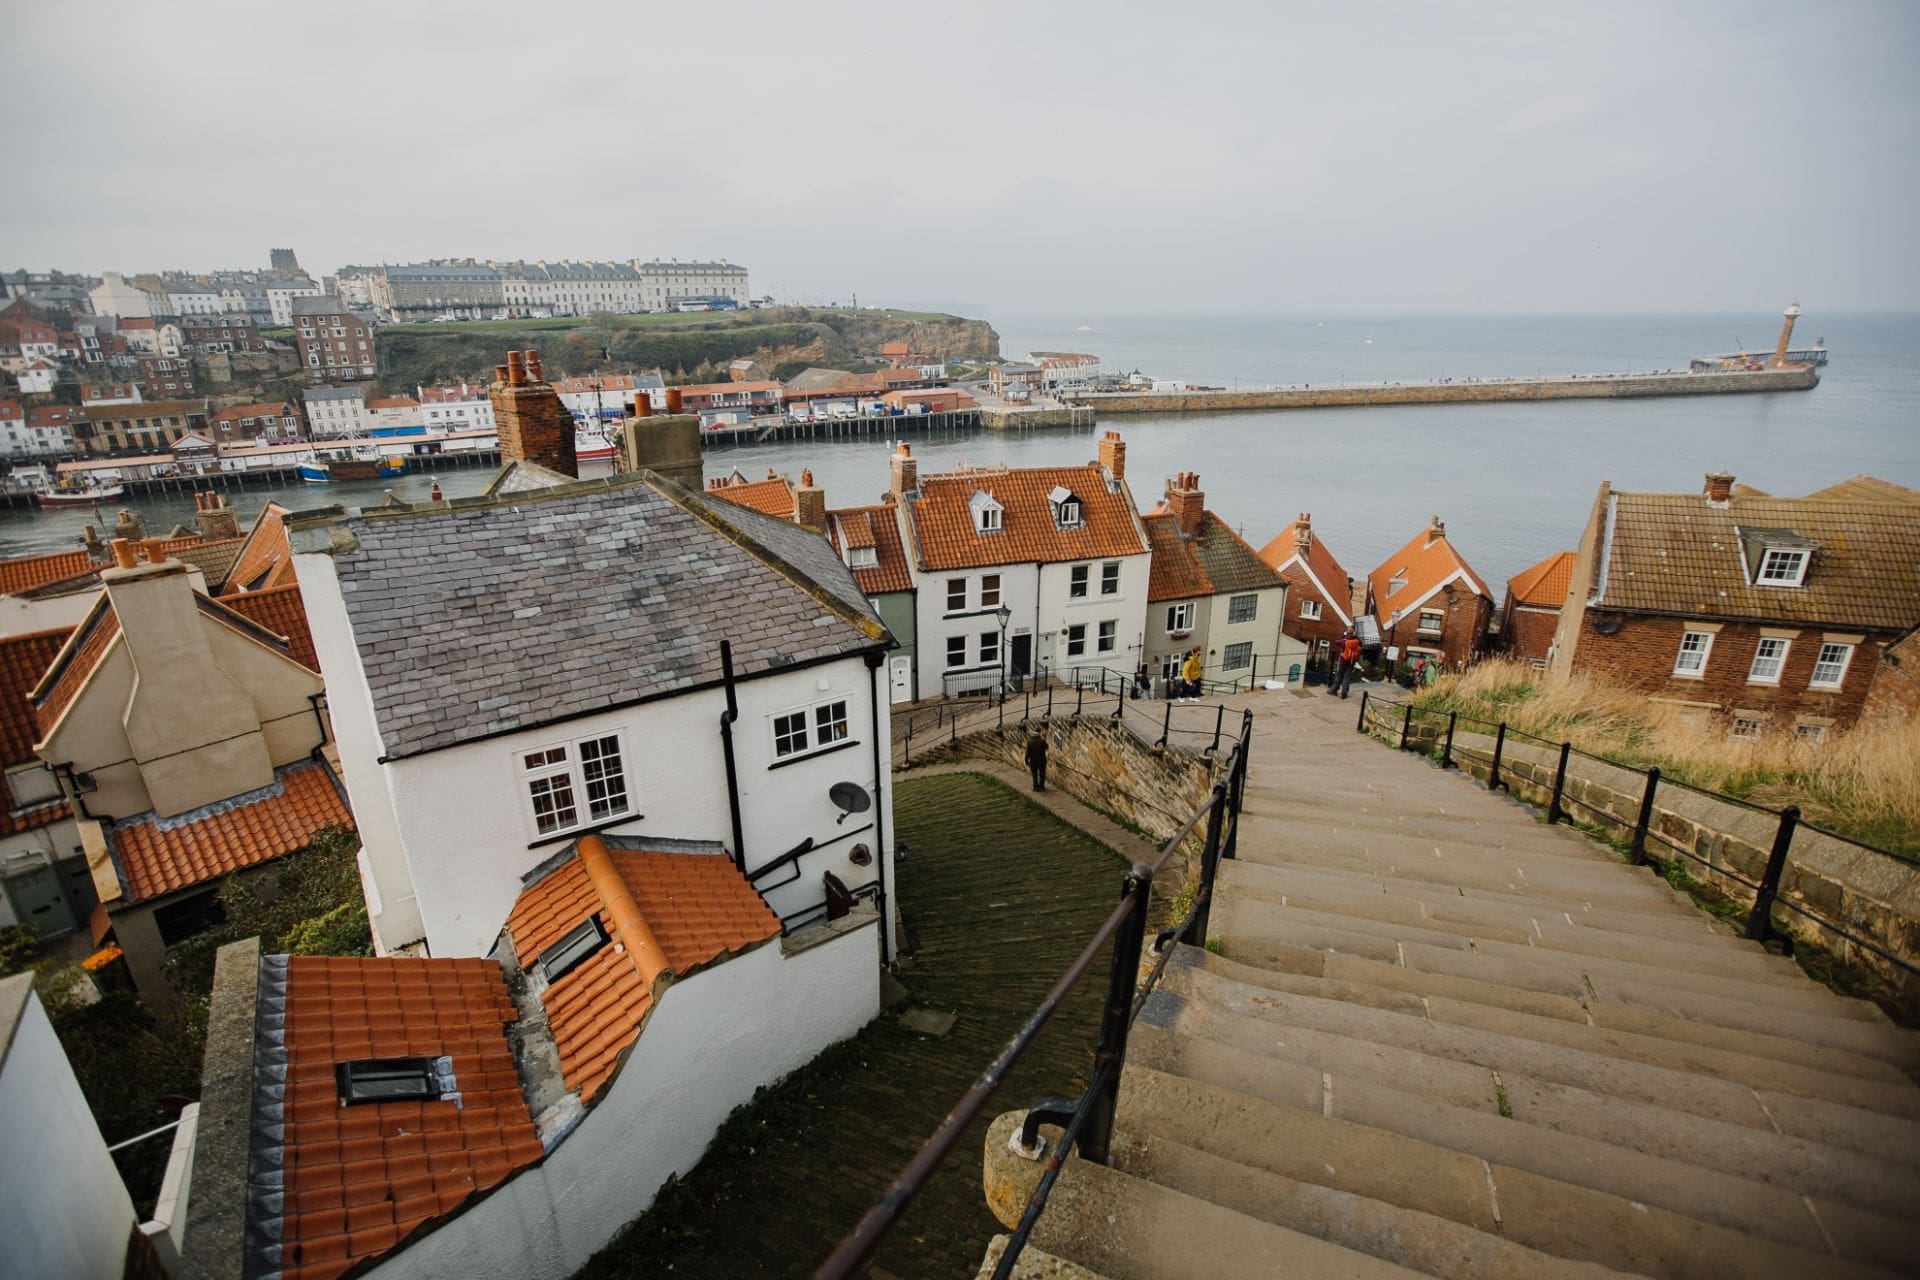 steps-leading-down-to-harbour-in-cute-british-seaside-town-whitby-robin-hoods-bay-day-trips-from-leeds-england-uk